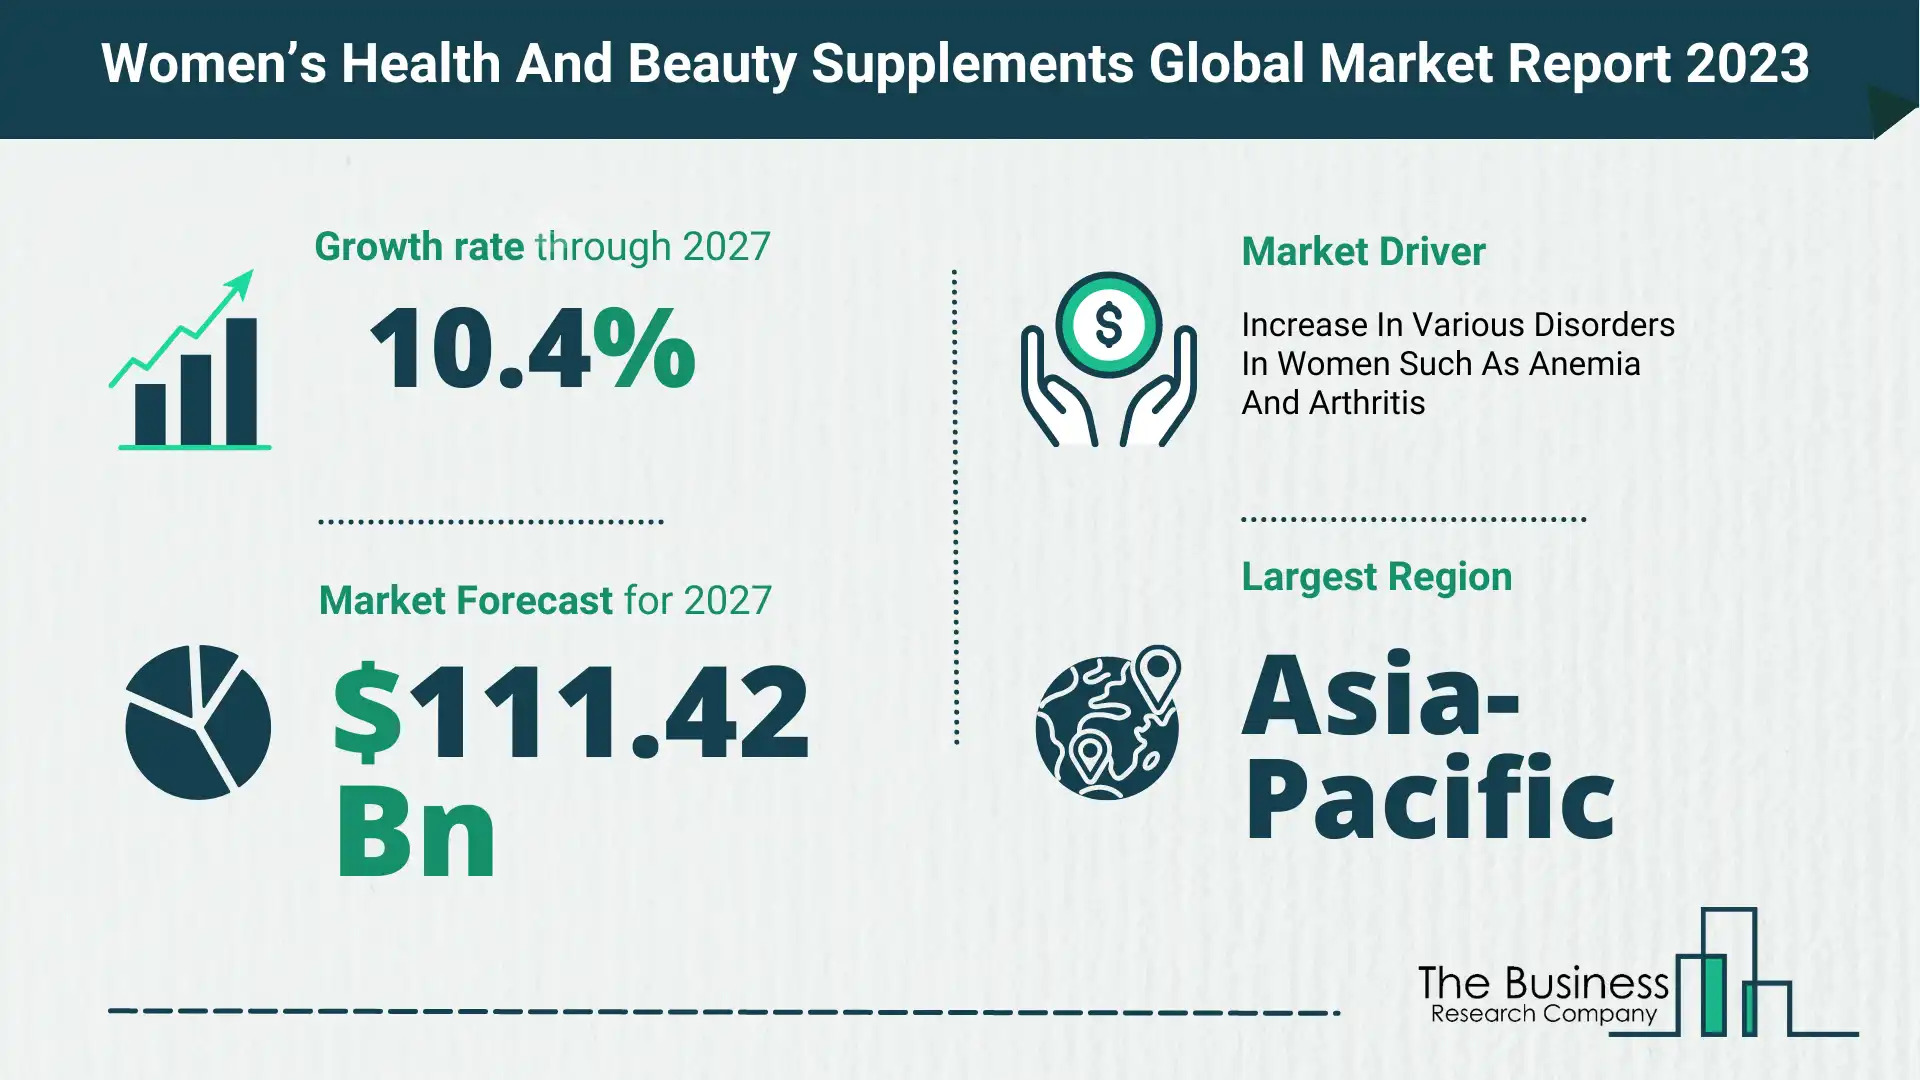 What Will The Women’s Health And Beauty Supplements Market Look Like In 2023?